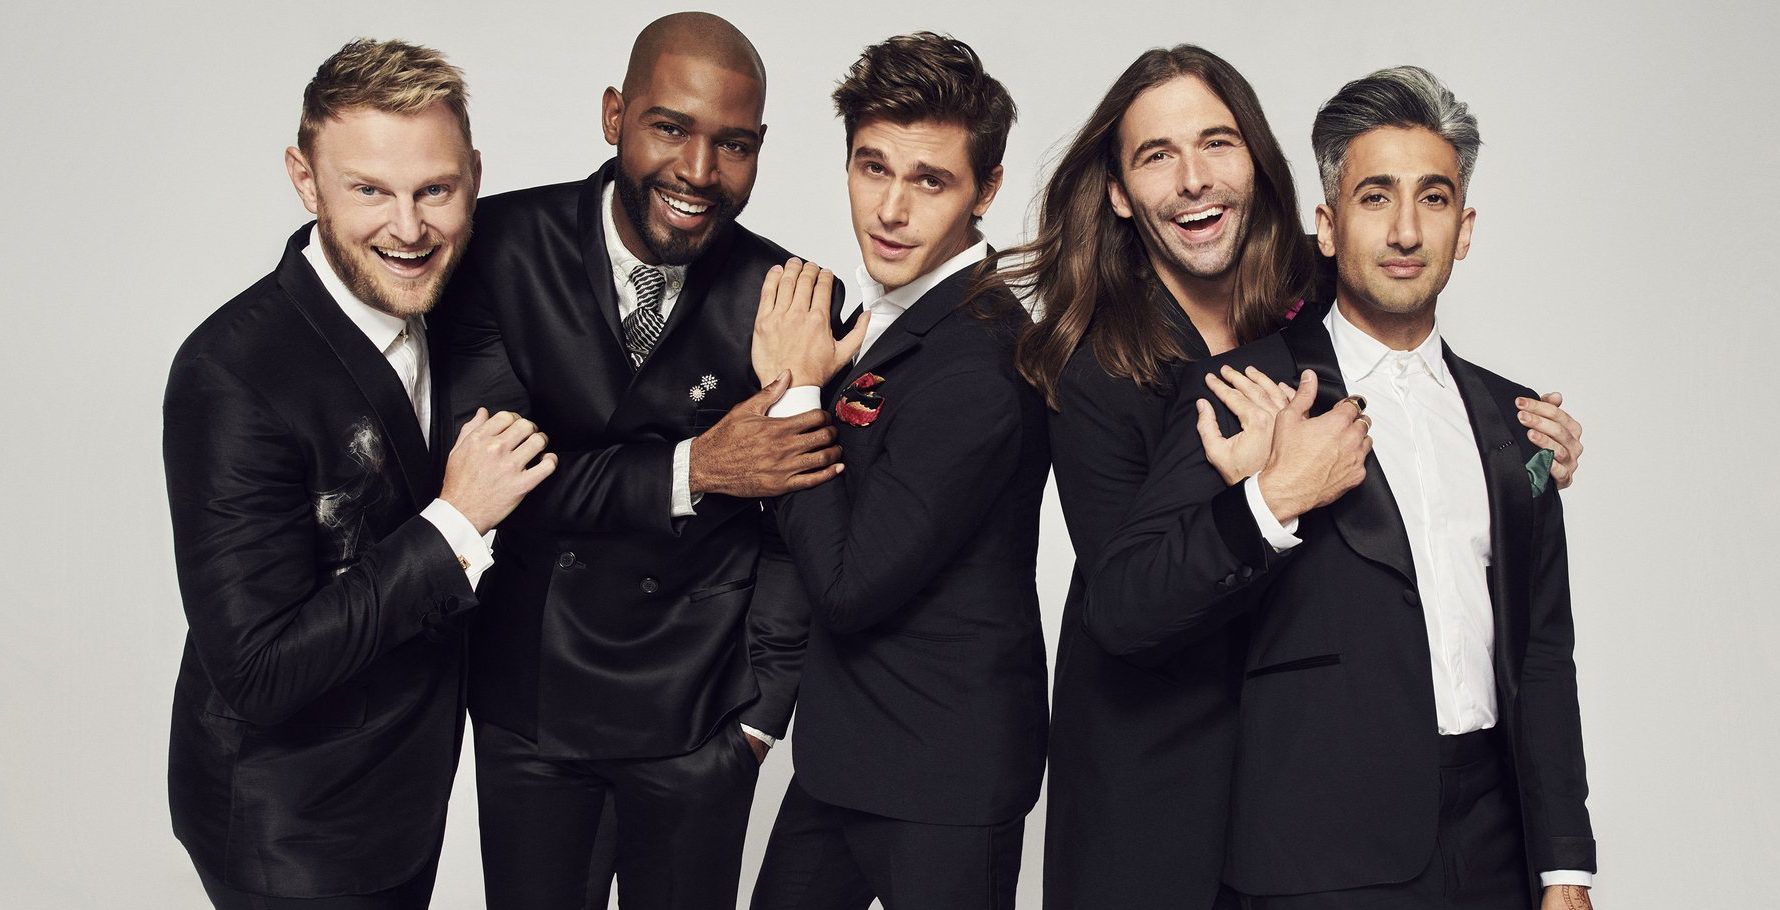 Queer Eye Netflix dressed in tuxedos